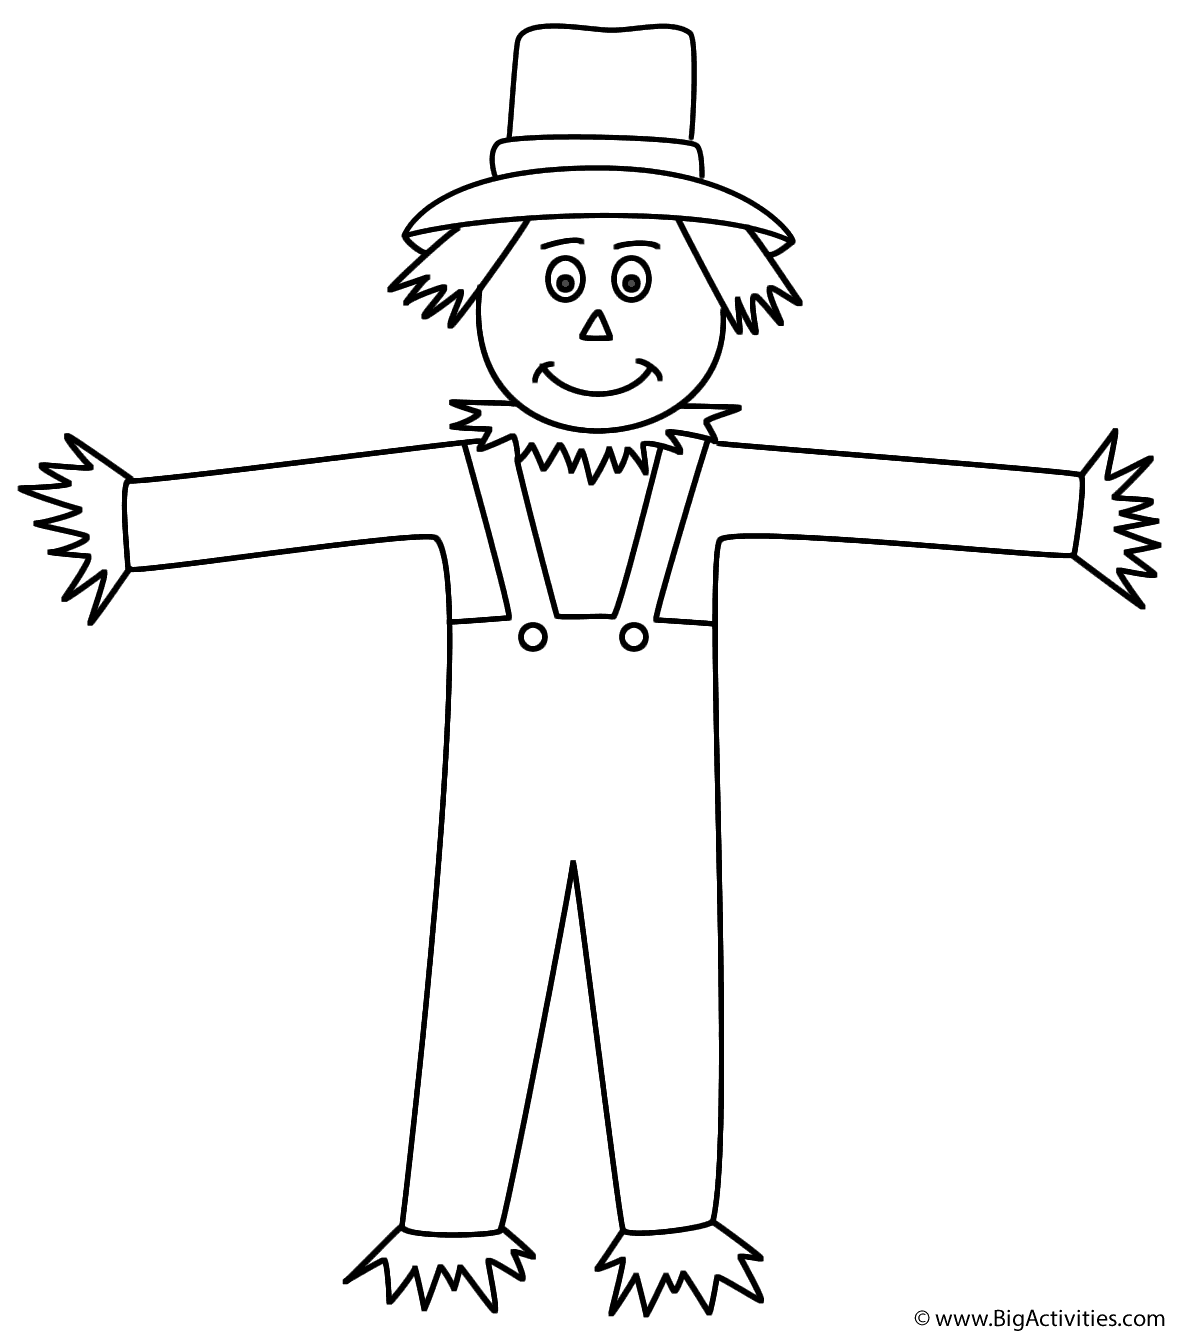 Scarecrow Coloring Page (Thanksgiving)